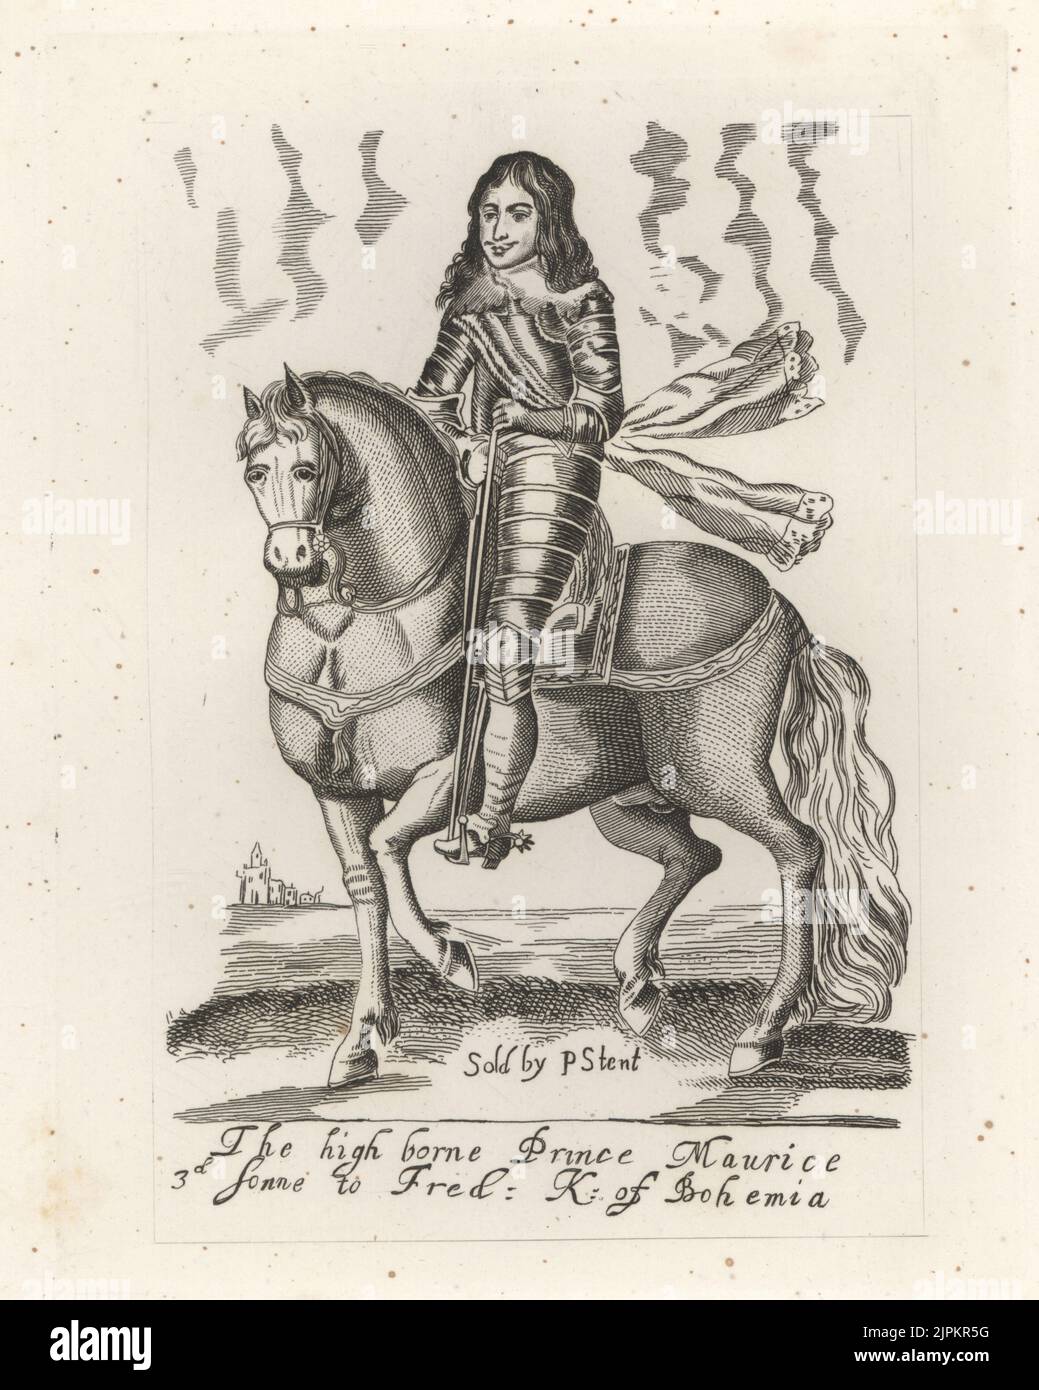 Maurice, Prince Palatine of the Rhine, 1621-1652. Fought in the English Civil War on the Royalist side. On horseback, in suit of plate armour with collar and sash. Prince Maurice, 3rd son to Frederick V, King of Bohemia. From a unique equestrian print in Earl Spencer's Clarendon, sold by Peter Stent. Copperplate engraving from Samuel Woodburn’s Gallery of Rare Portraits Consisting of Original Plates, George Jones, 102 St Martin’s Lane, London, 1816. Stock Photo